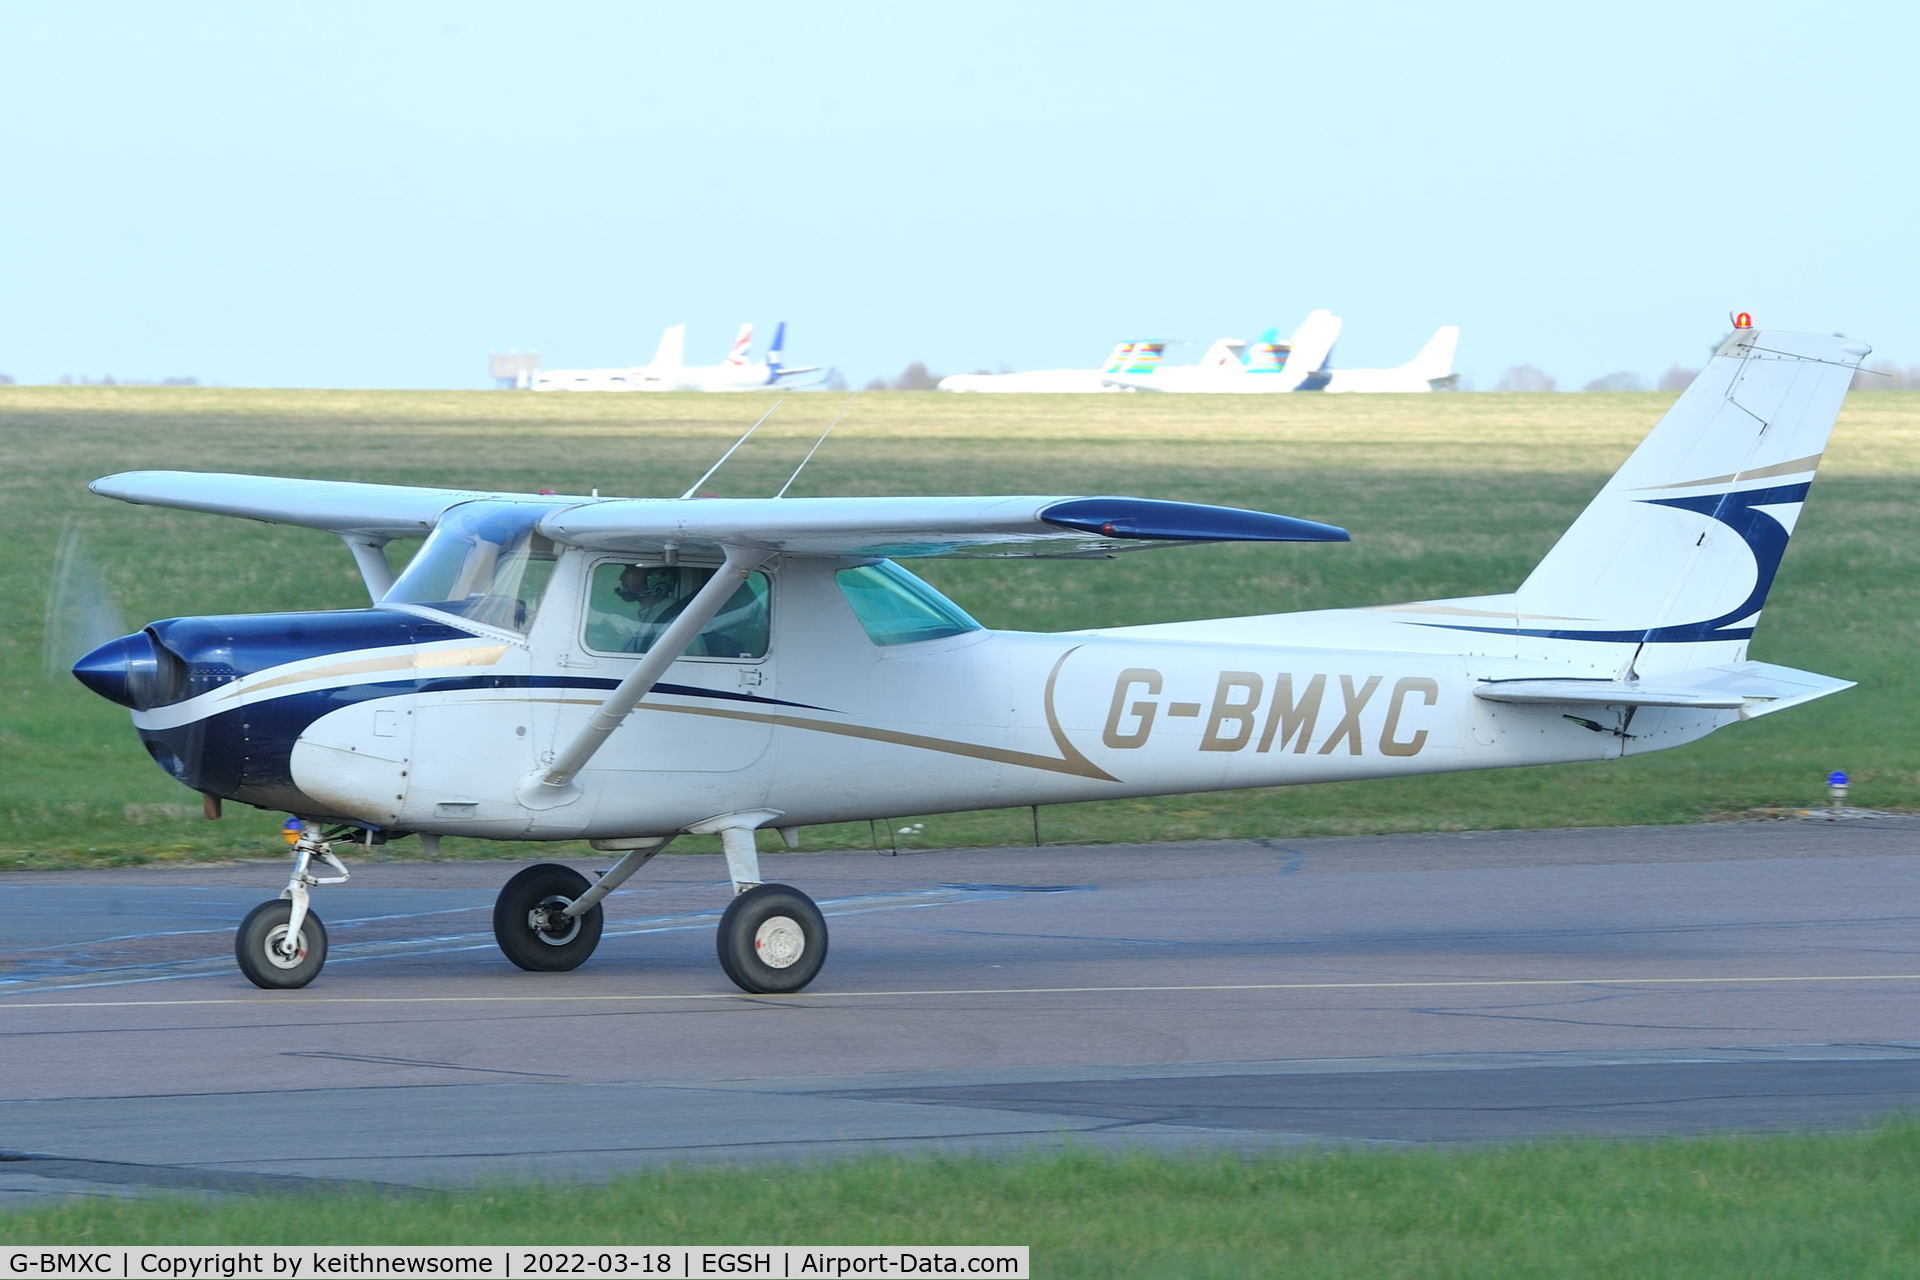 G-BMXC, 1977 Cessna 152 C/N 152-80416, Arriving at Norwich.